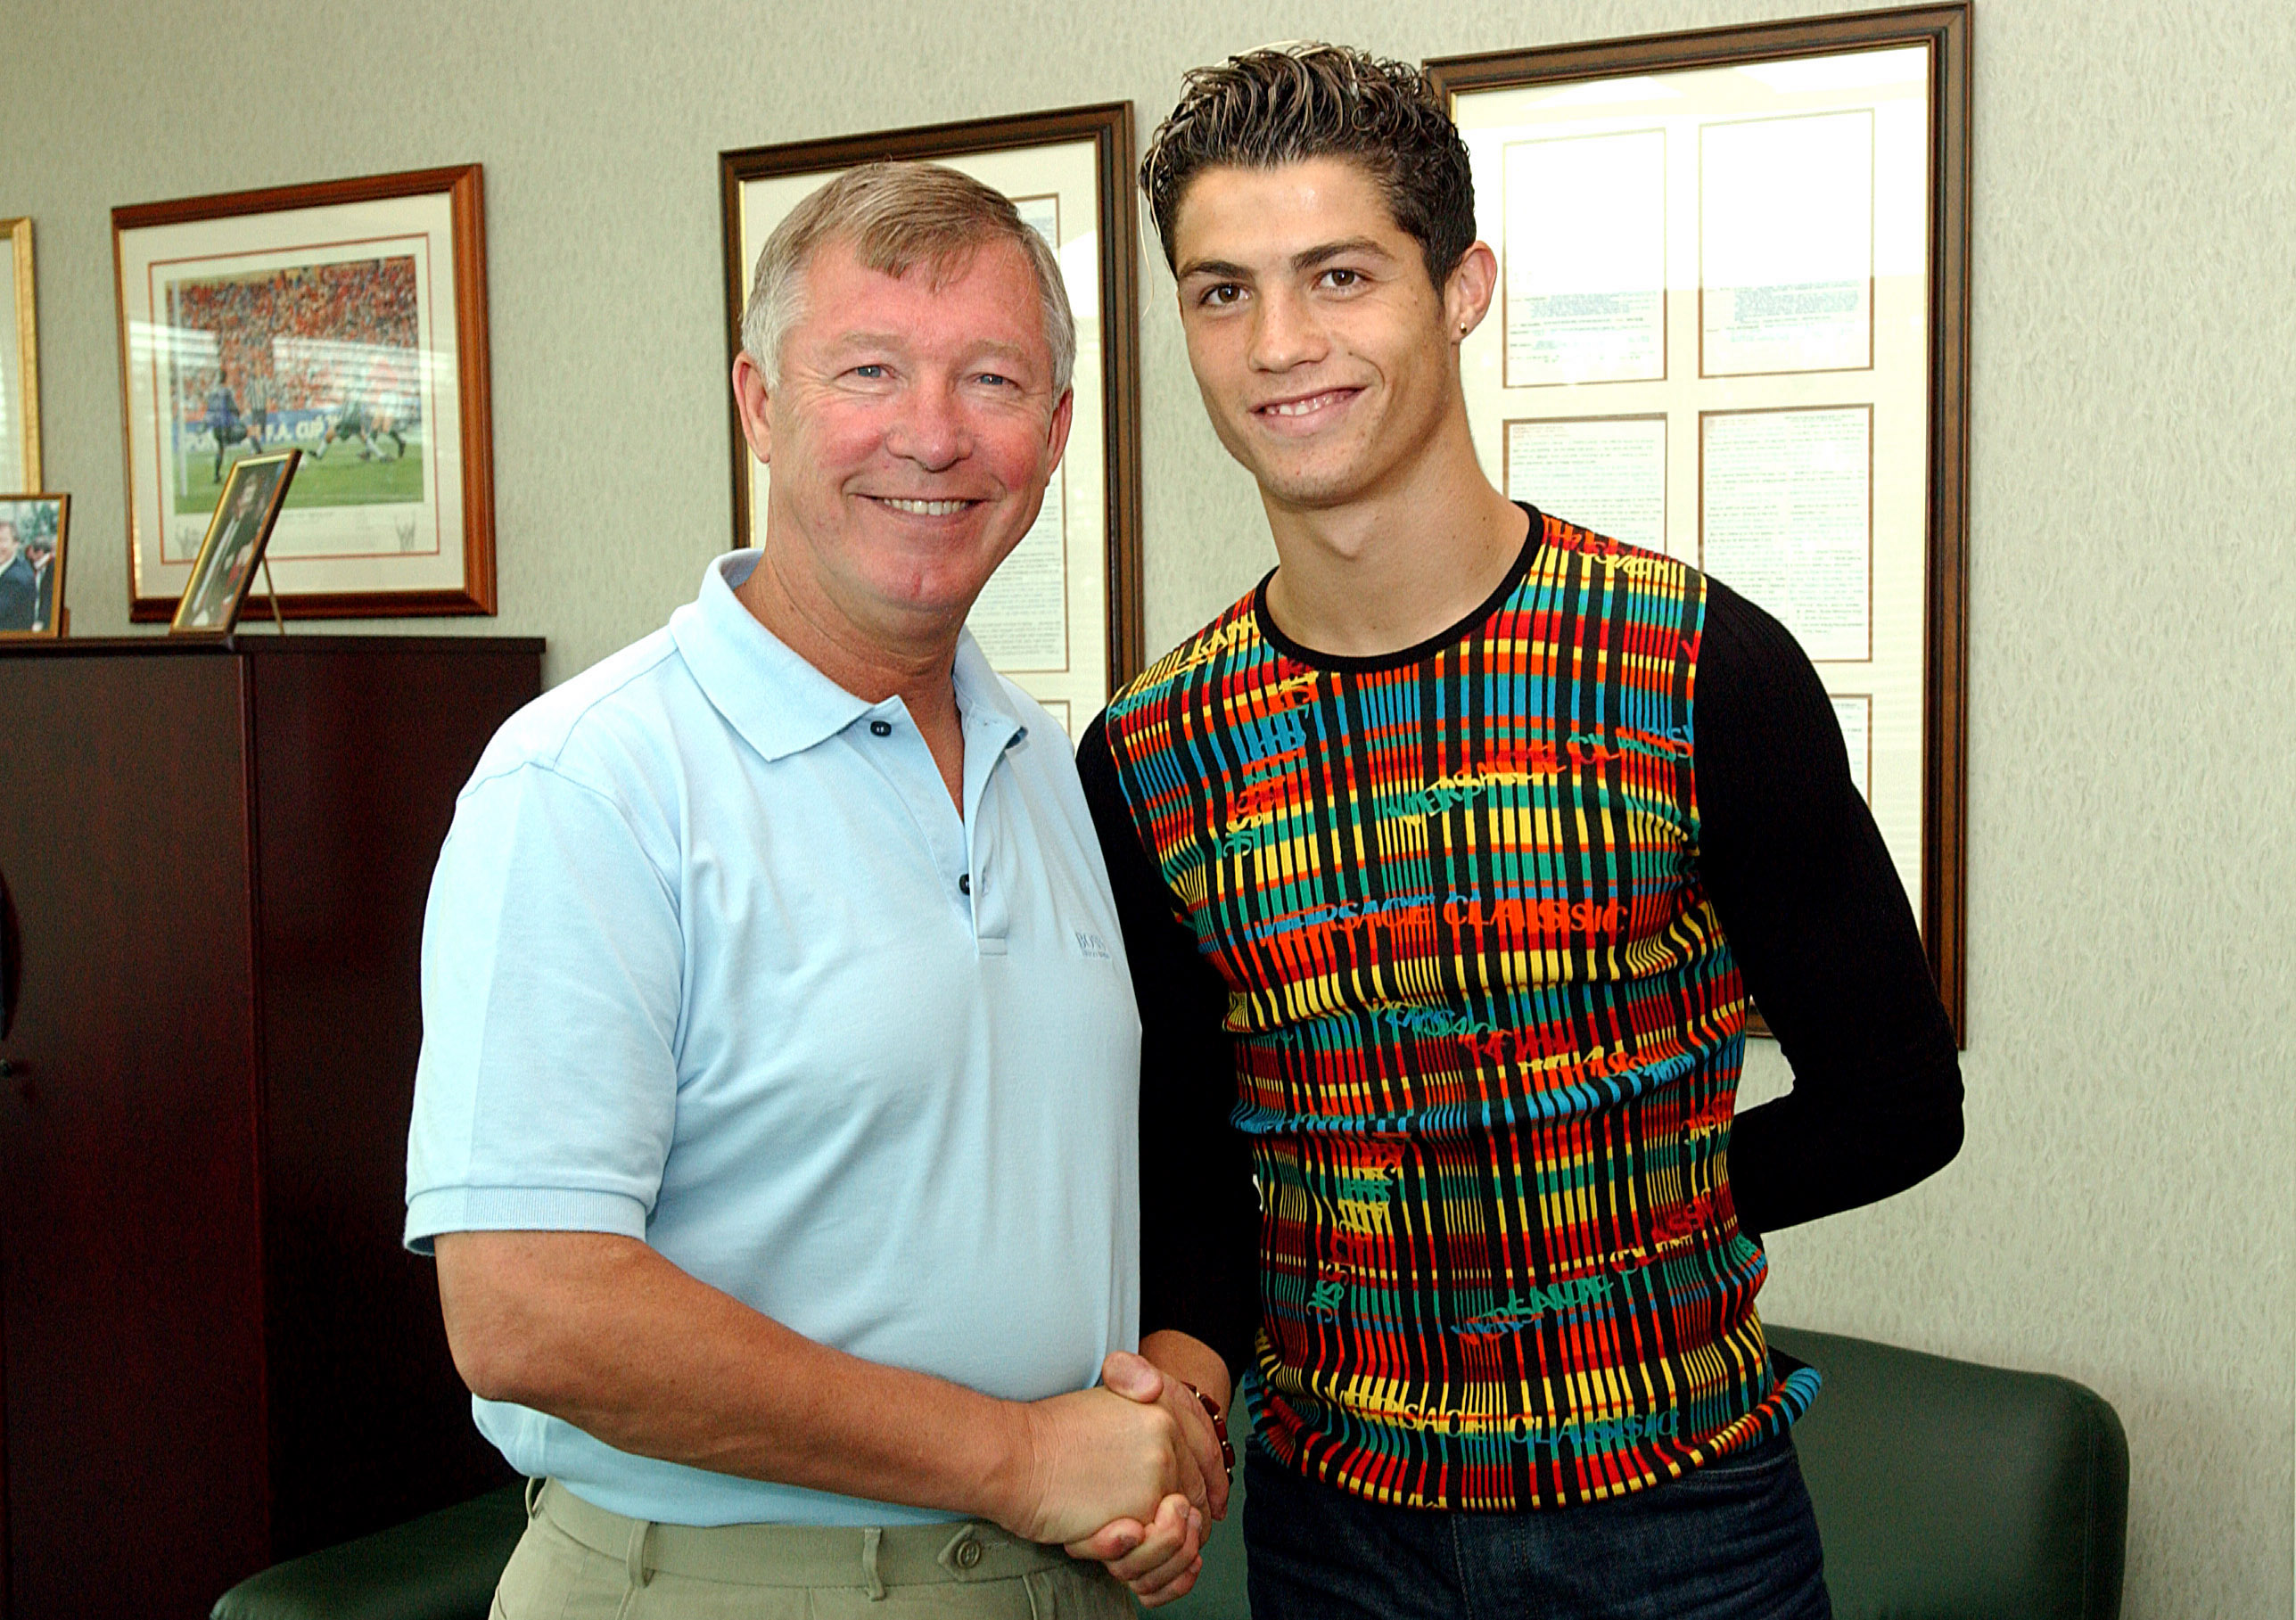 Ronaldo famously referenced Paim's quality when he joined Manchester United in 2003